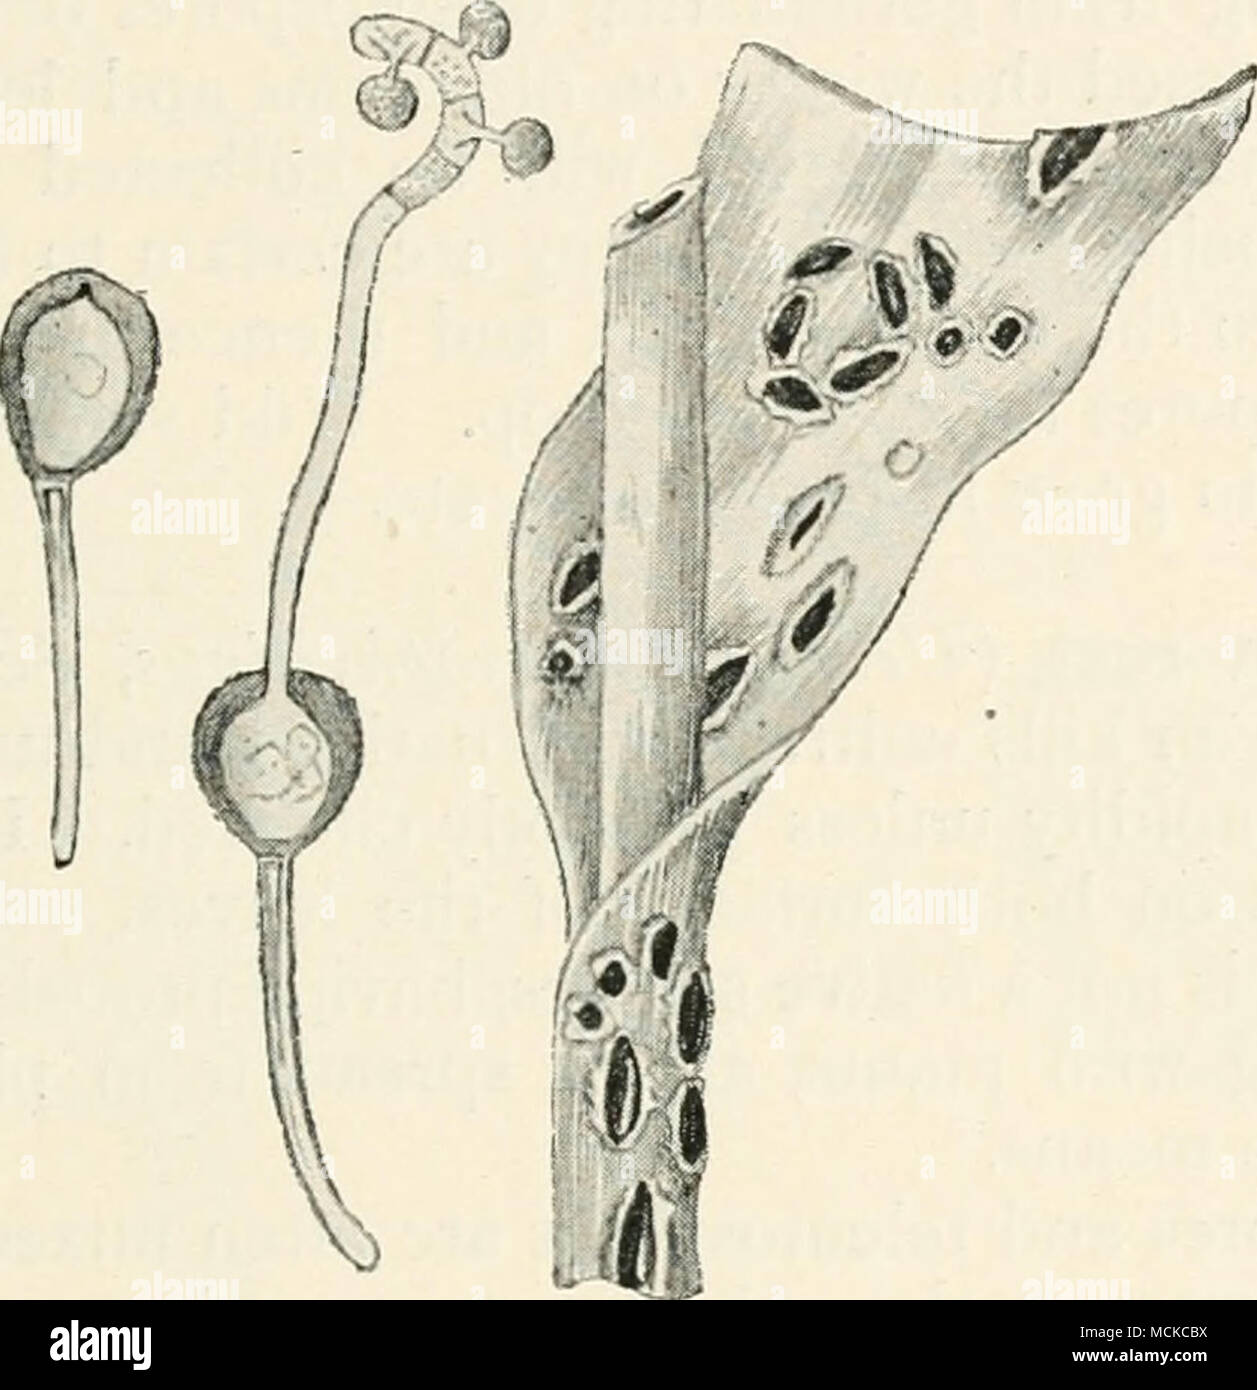 . Fig. 85. — Uromyces coh/iui. i, portion of a diseased Colchicum leaf; 2, teleutospores, one of vvhicli has germinated and produced a promycelium bearing three secondary spores. Fig. i reduced, Fig. 2 mag. dark brown, apex much thickened, with a small, hyaline, wart- like papilla, 26-35 X 20-26 /x. If the disease appears early, spray with Bordeaux mixture ; when the pods are formed, use permanganate of potash. Broad bean rust {Uromyces fabae, De Bary) is a parasite very common on the leaves and stems of broad beans, peas, also on various wild leguminous plants, vetches, etc. The aecidium stag Stock Photo